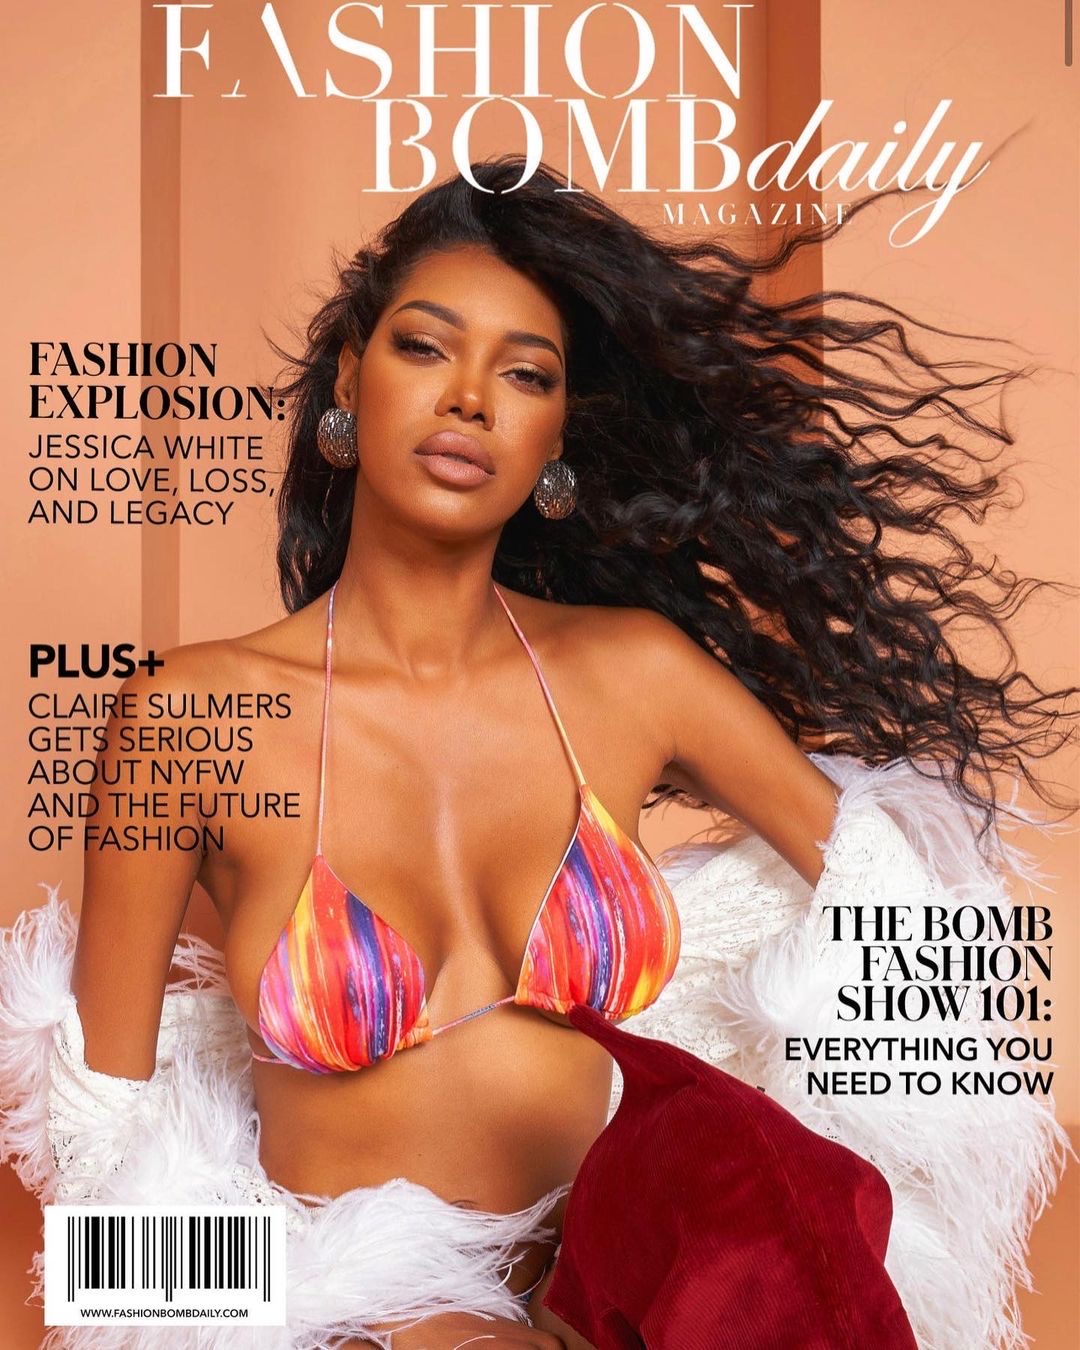 Fashion News Fashion Bomb Daily Releases Our First Magazine With Supermodel Jessica White as the Covergirl in Fashion Bomb Daily Shop